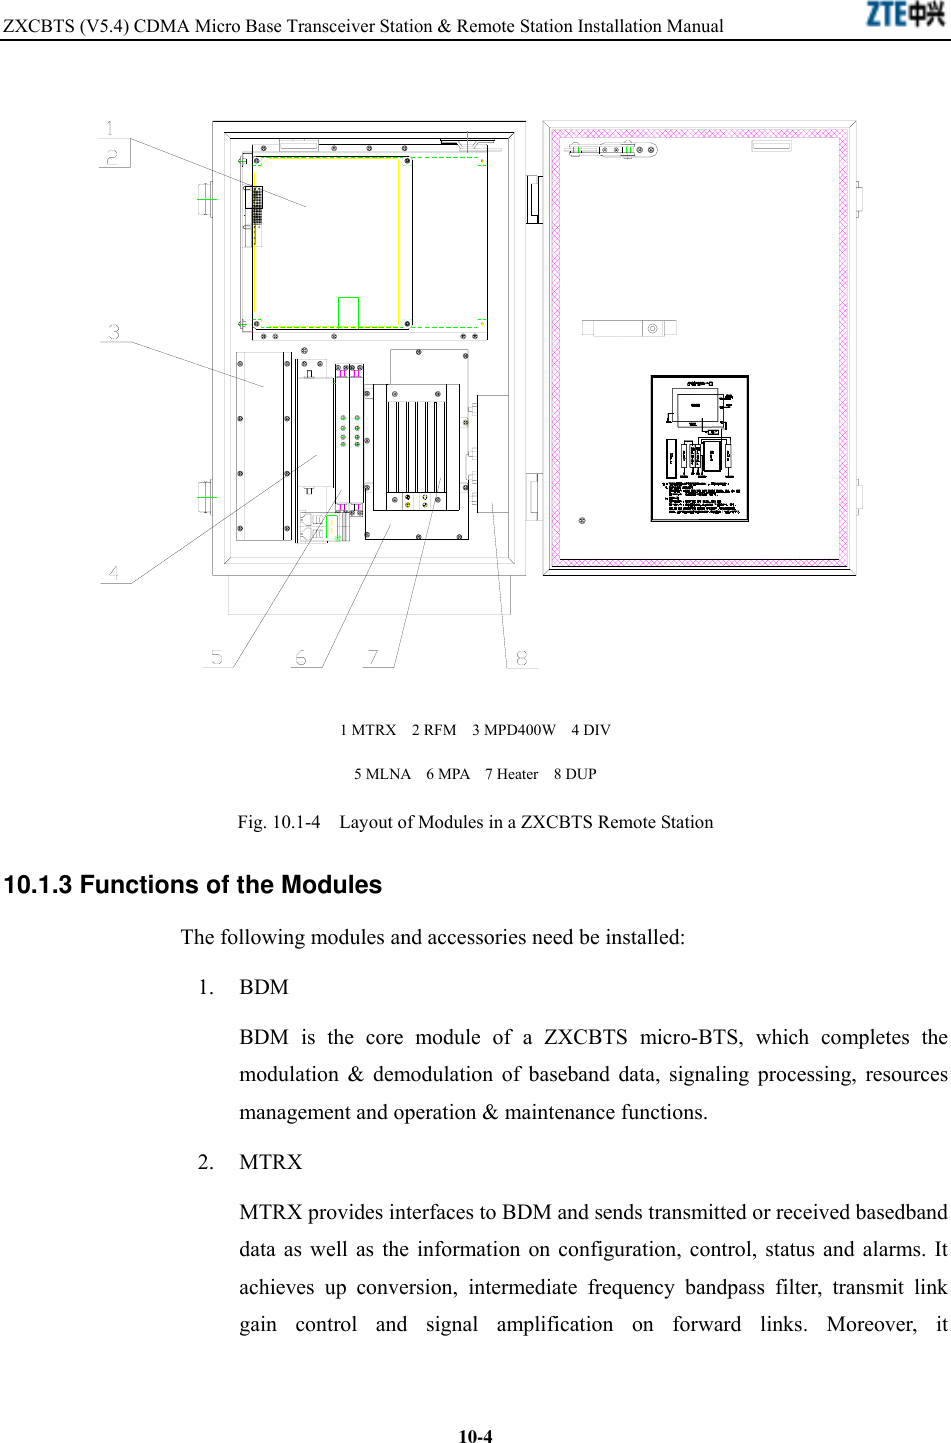 ZXCBTS (V5.4) CDMA Micro Base Transceiver Station &amp; Remote Station Installation Manual    10-4 1 MTRX  2 RFM  3 MPD400W  4 DIV 5 MLNA  6 MPA  7 Heater  8 DUP Fig. 10.1-4    Layout of Modules in a ZXCBTS Remote Station 10.1.3 Functions of the Modules The following modules and accessories need be installed: 1. BDM BDM is the core module of a ZXCBTS micro-BTS, which completes the modulation &amp; demodulation of baseband data, signaling processing, resources management and operation &amp; maintenance functions. 2. MTRX MTRX provides interfaces to BDM and sends transmitted or received basedband data as well as the information on configuration, control, status and alarms. It achieves up conversion, intermediate frequency bandpass filter, transmit link gain control and signal amplification on forward links. Moreover, it 